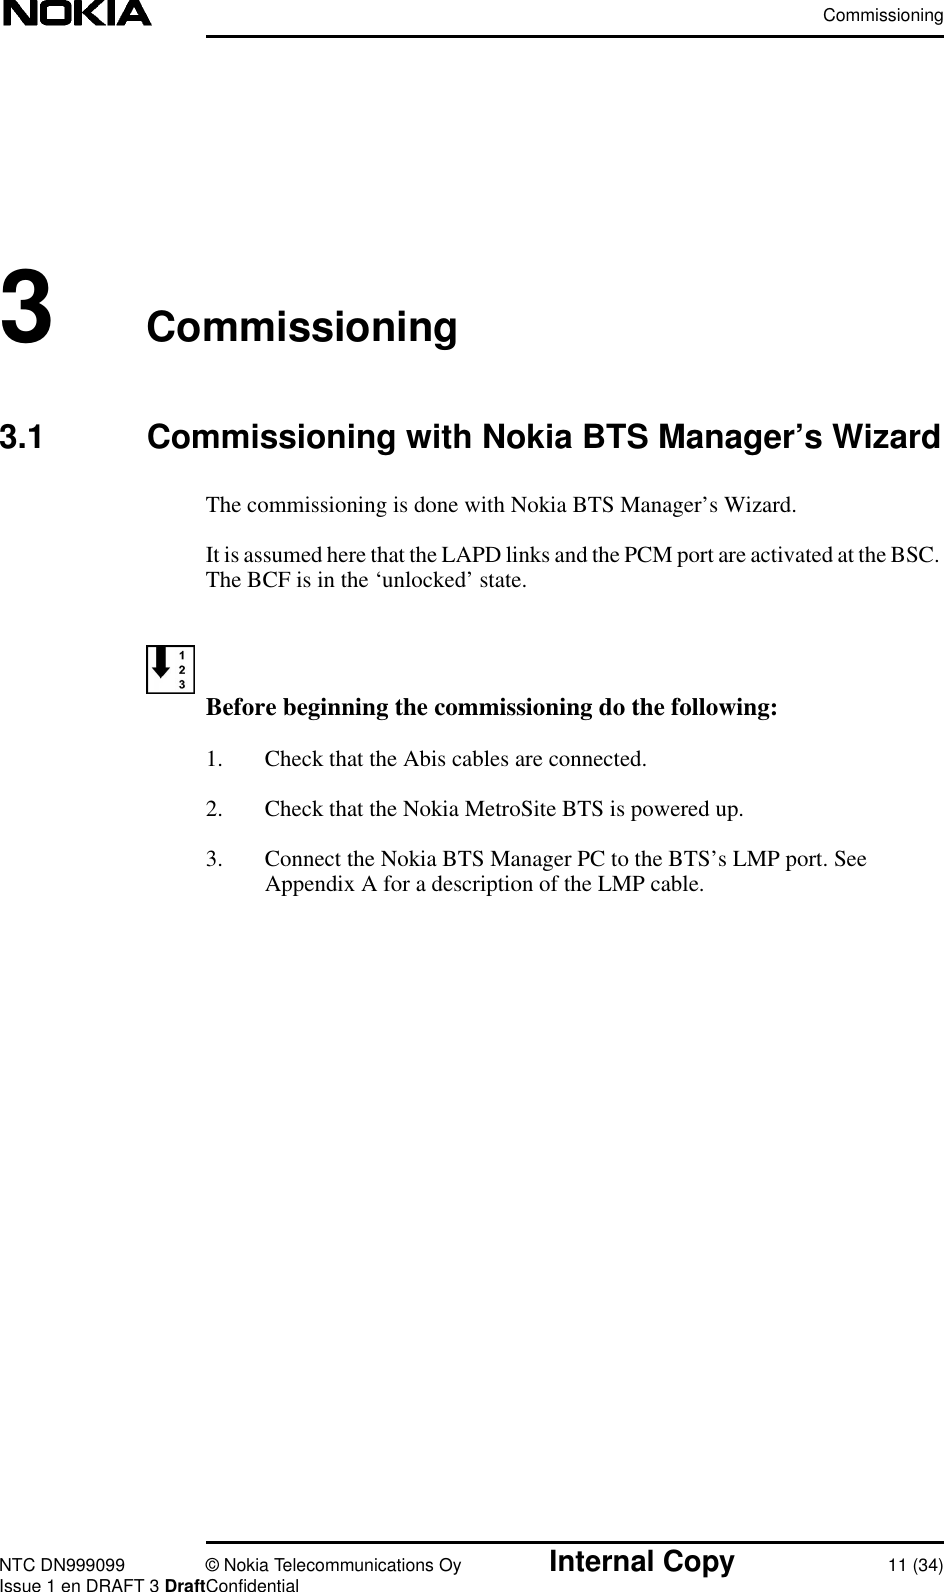 CommissioningNTC DN999099 © Nokia Telecommunications Oy Internal Copy 11 (34)Issue 1 en DRAFT 3 DraftConfidential3Commissioning3.1 Commissioning with Nokia BTS Manager’s WizardThe commissioning is done with Nokia BTS Manager’s Wizard.It is assumed here that the LAPD links and the PCM port are activated at the BSC.The BCF is in the ‘unlocked’ state.Before beginning the commissioning do the following:1. Check that the Abis cables are connected.2. Check that the Nokia MetroSite BTS is powered up.3. Connect the Nokia BTS Manager PC to the BTS’s LMP port. SeeAppendix A for a description of the LMP cable.